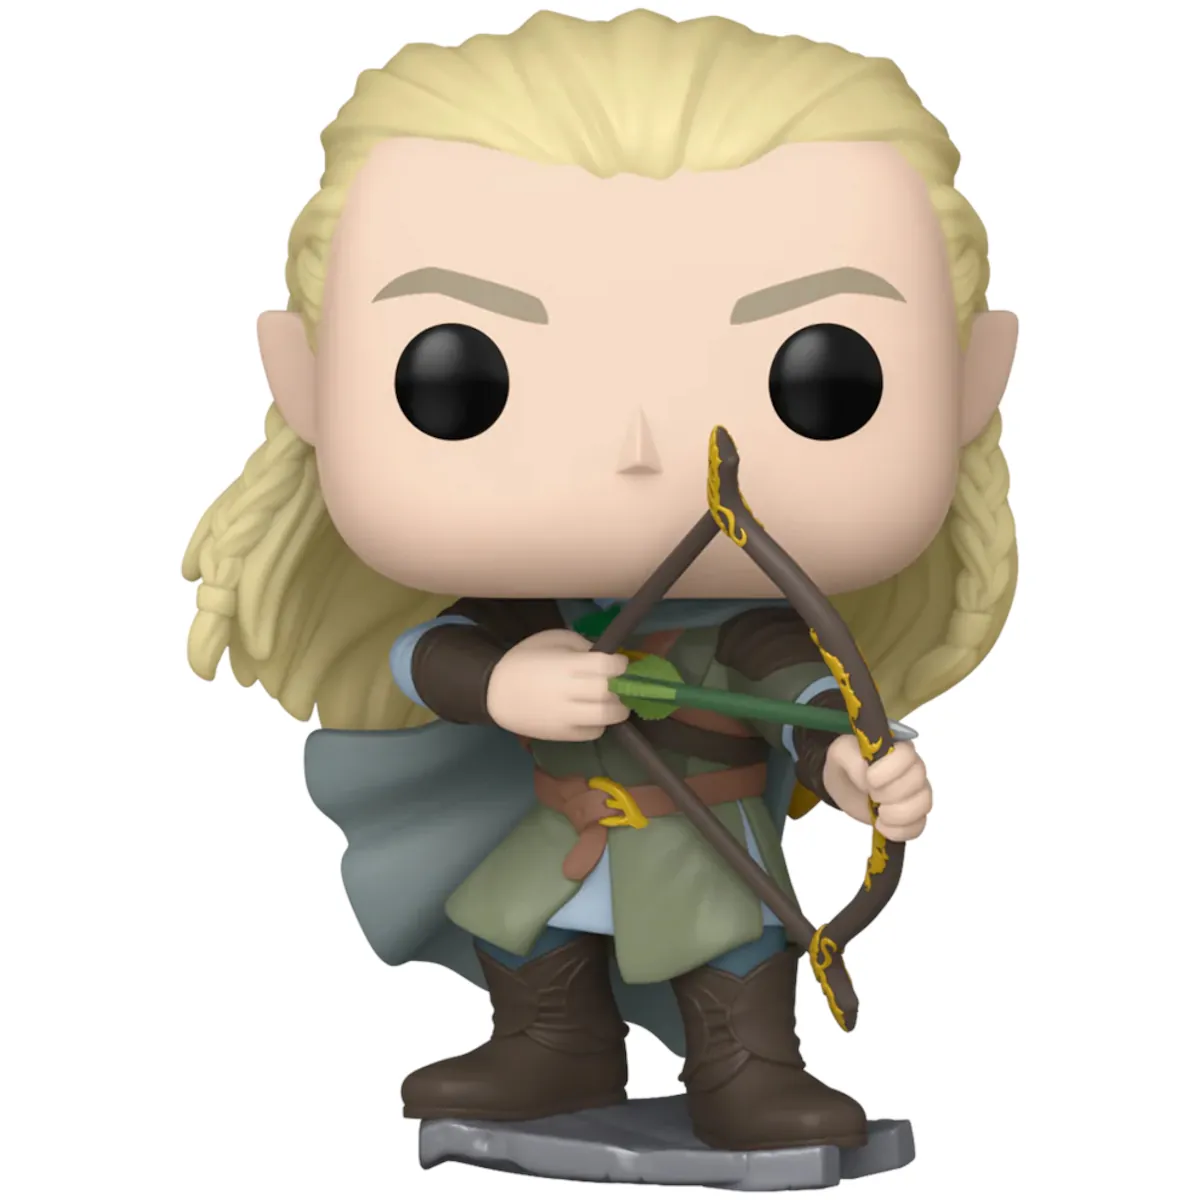 80831 Funko Pop! Movies - The Lord of the Rings - Legolas Greenleaf Collectable Vinyl Figure